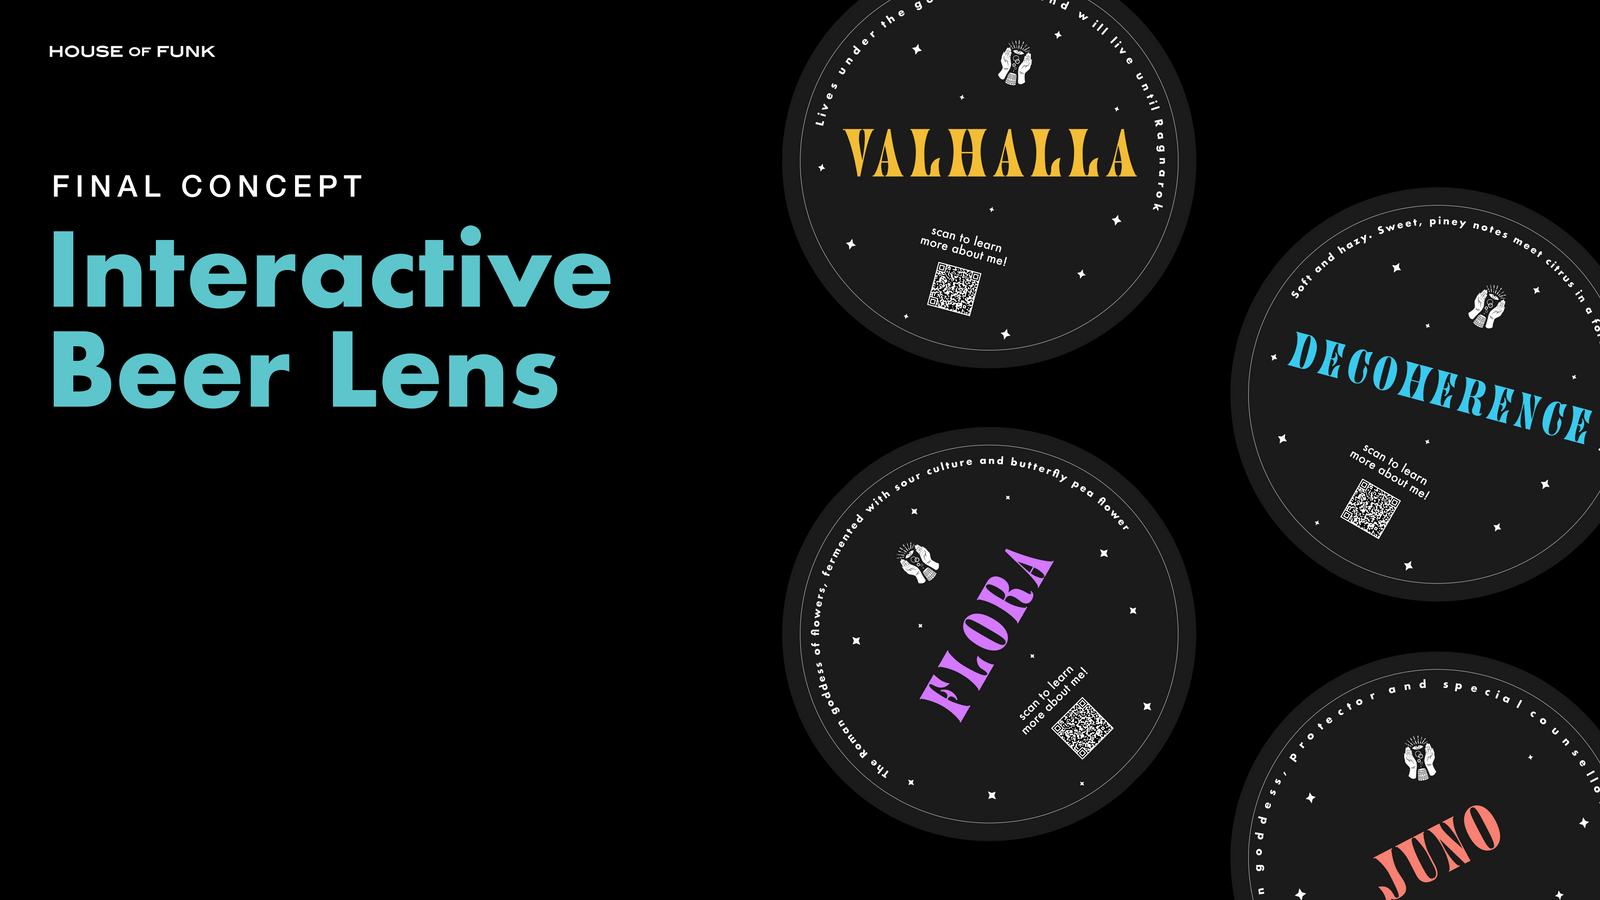 The Interactive Beer Lens